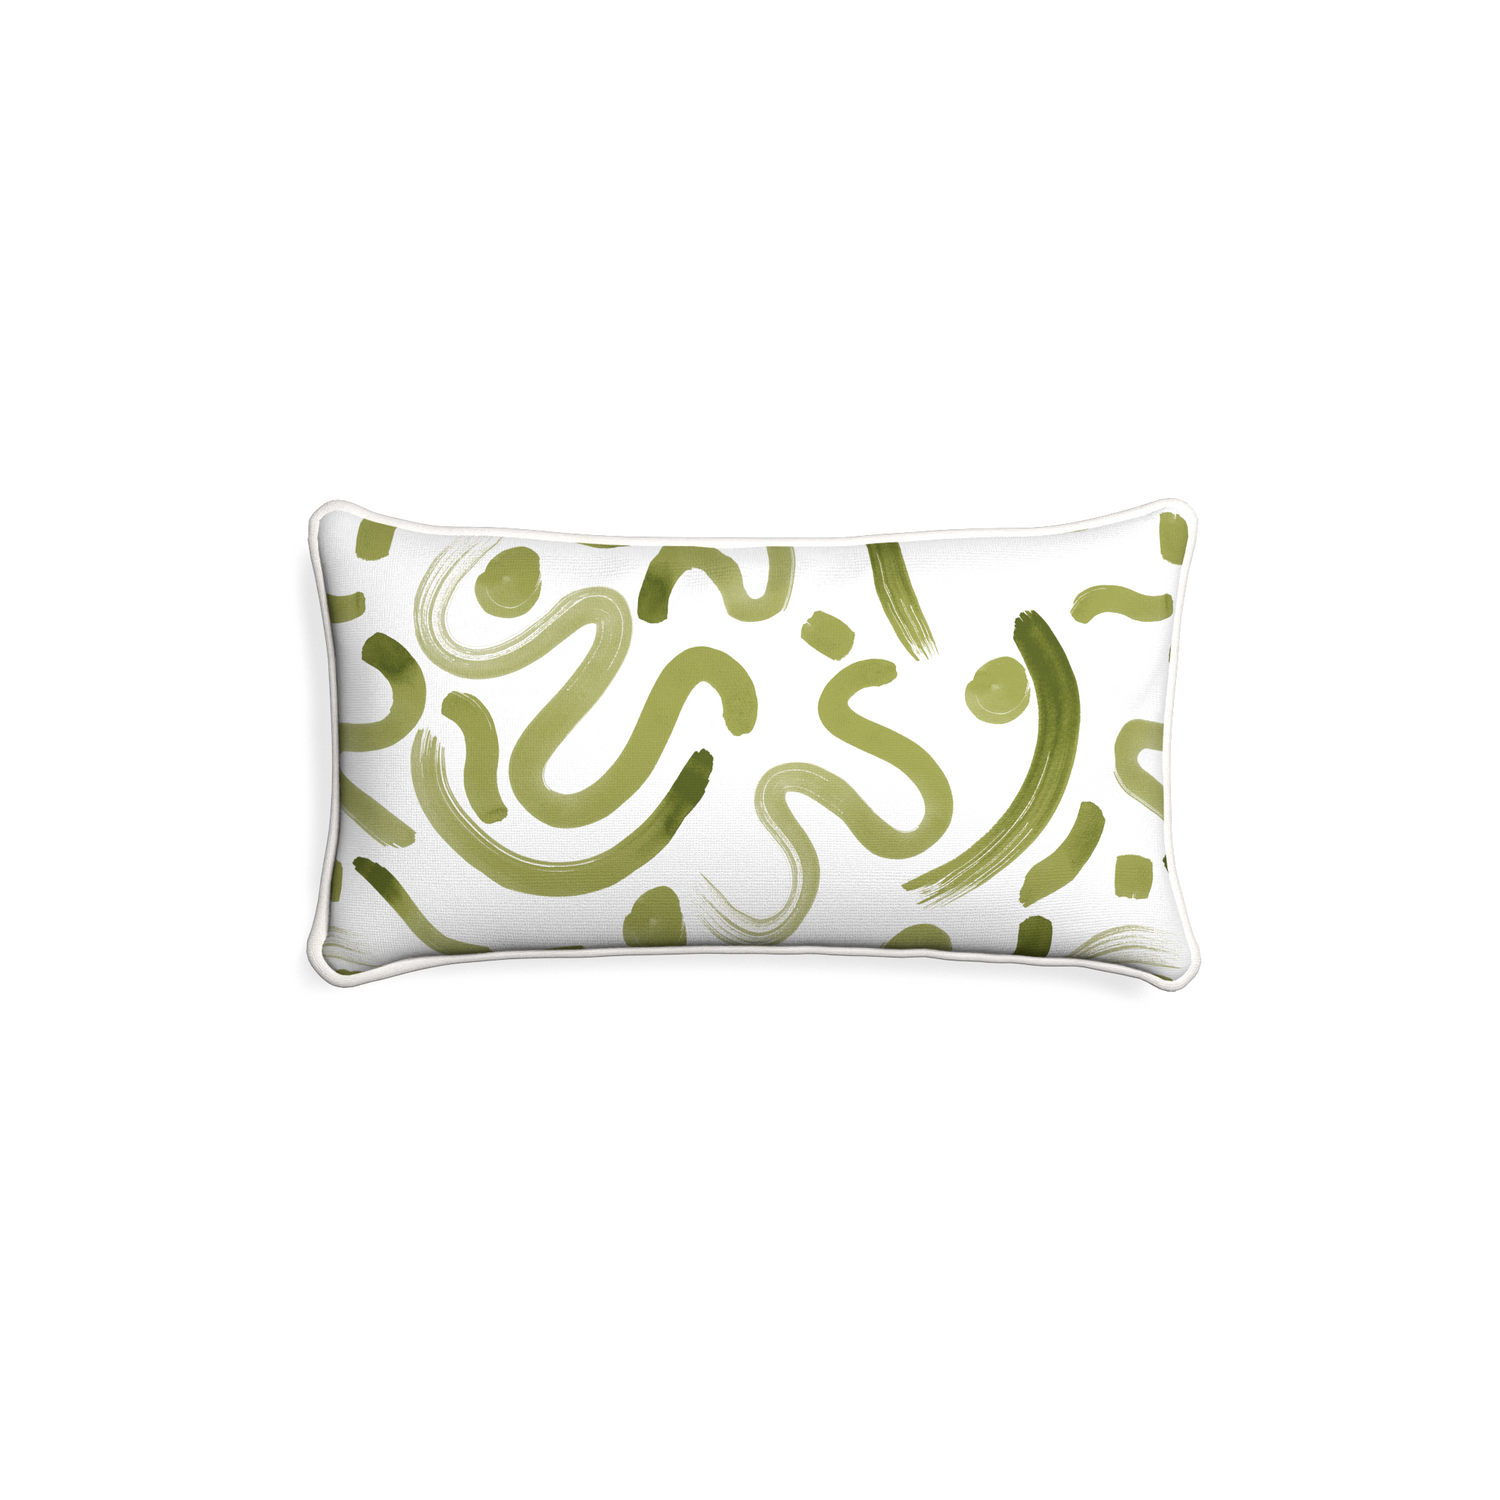 Petite-lumbar hockney moss custom moss greenpillow with snow piping on white background